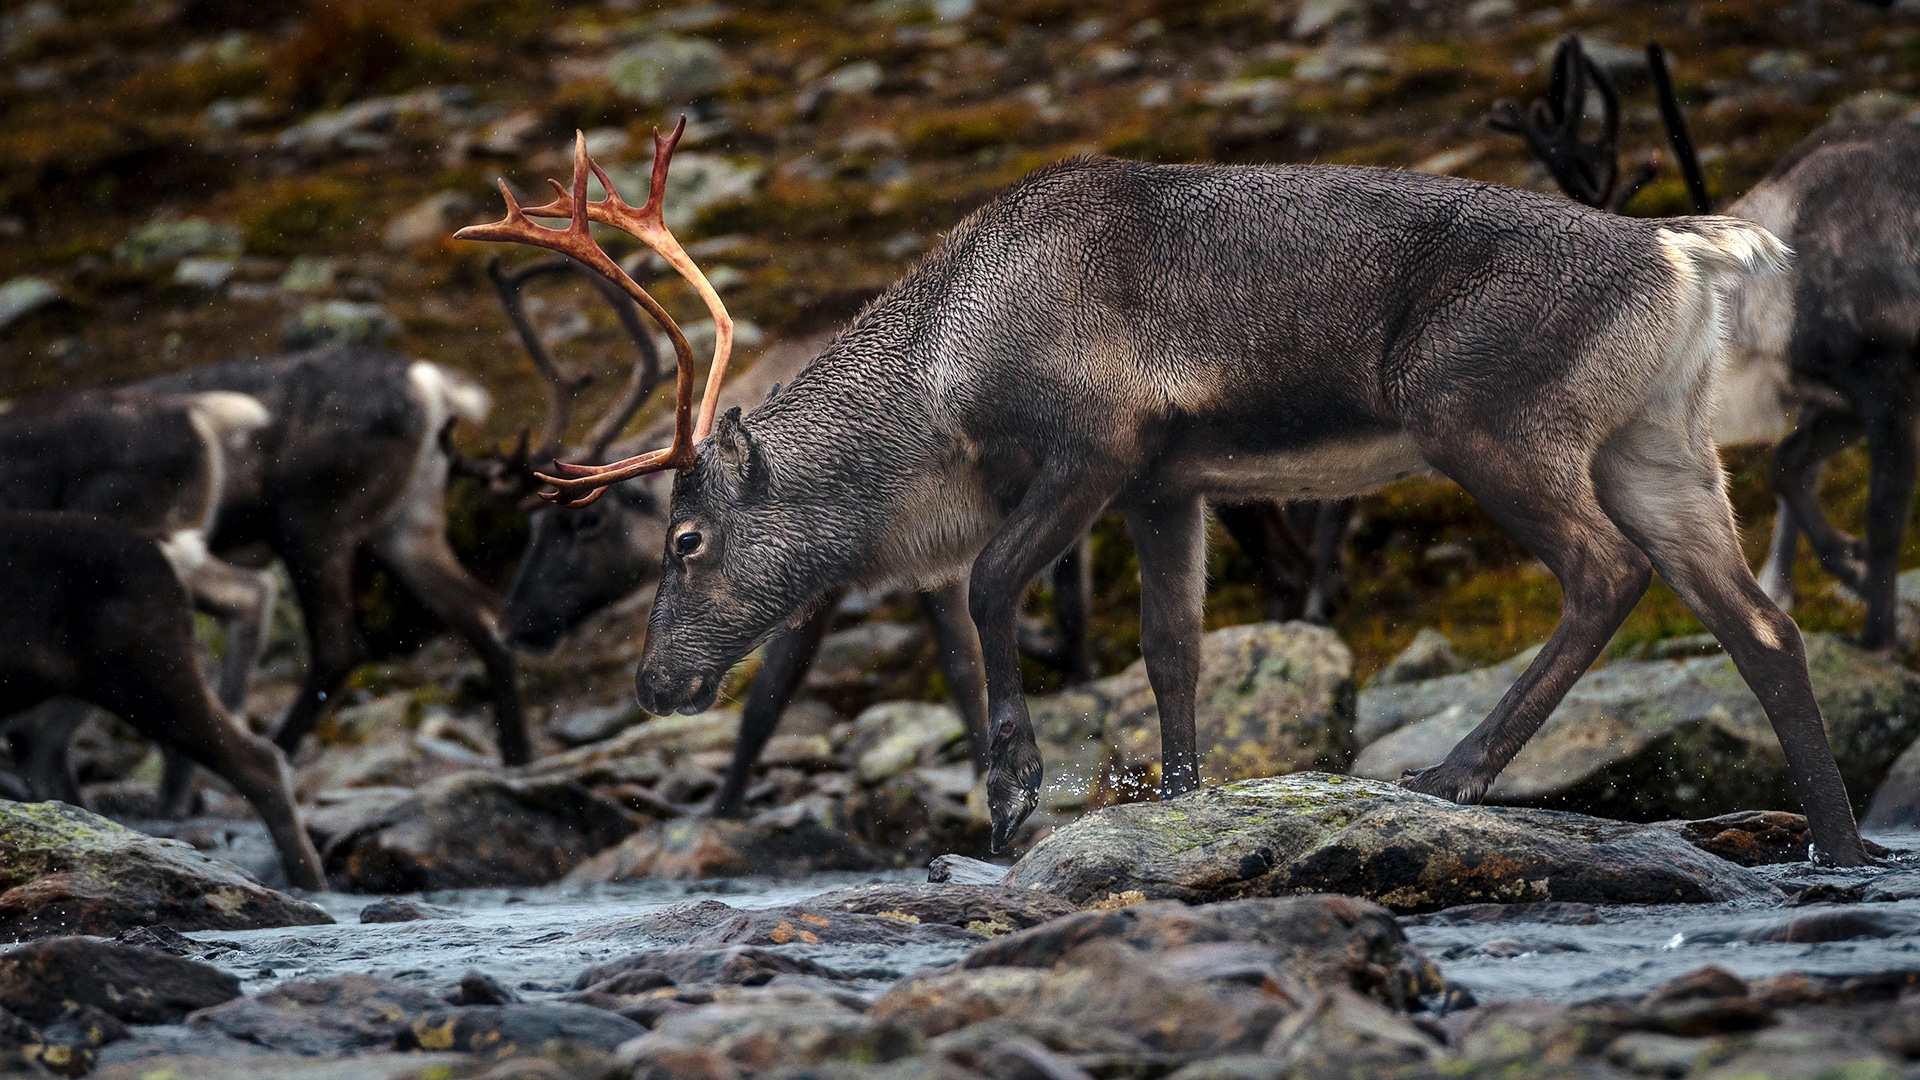 A reindeer in a herd walking across a shallow river at Valdresflya.